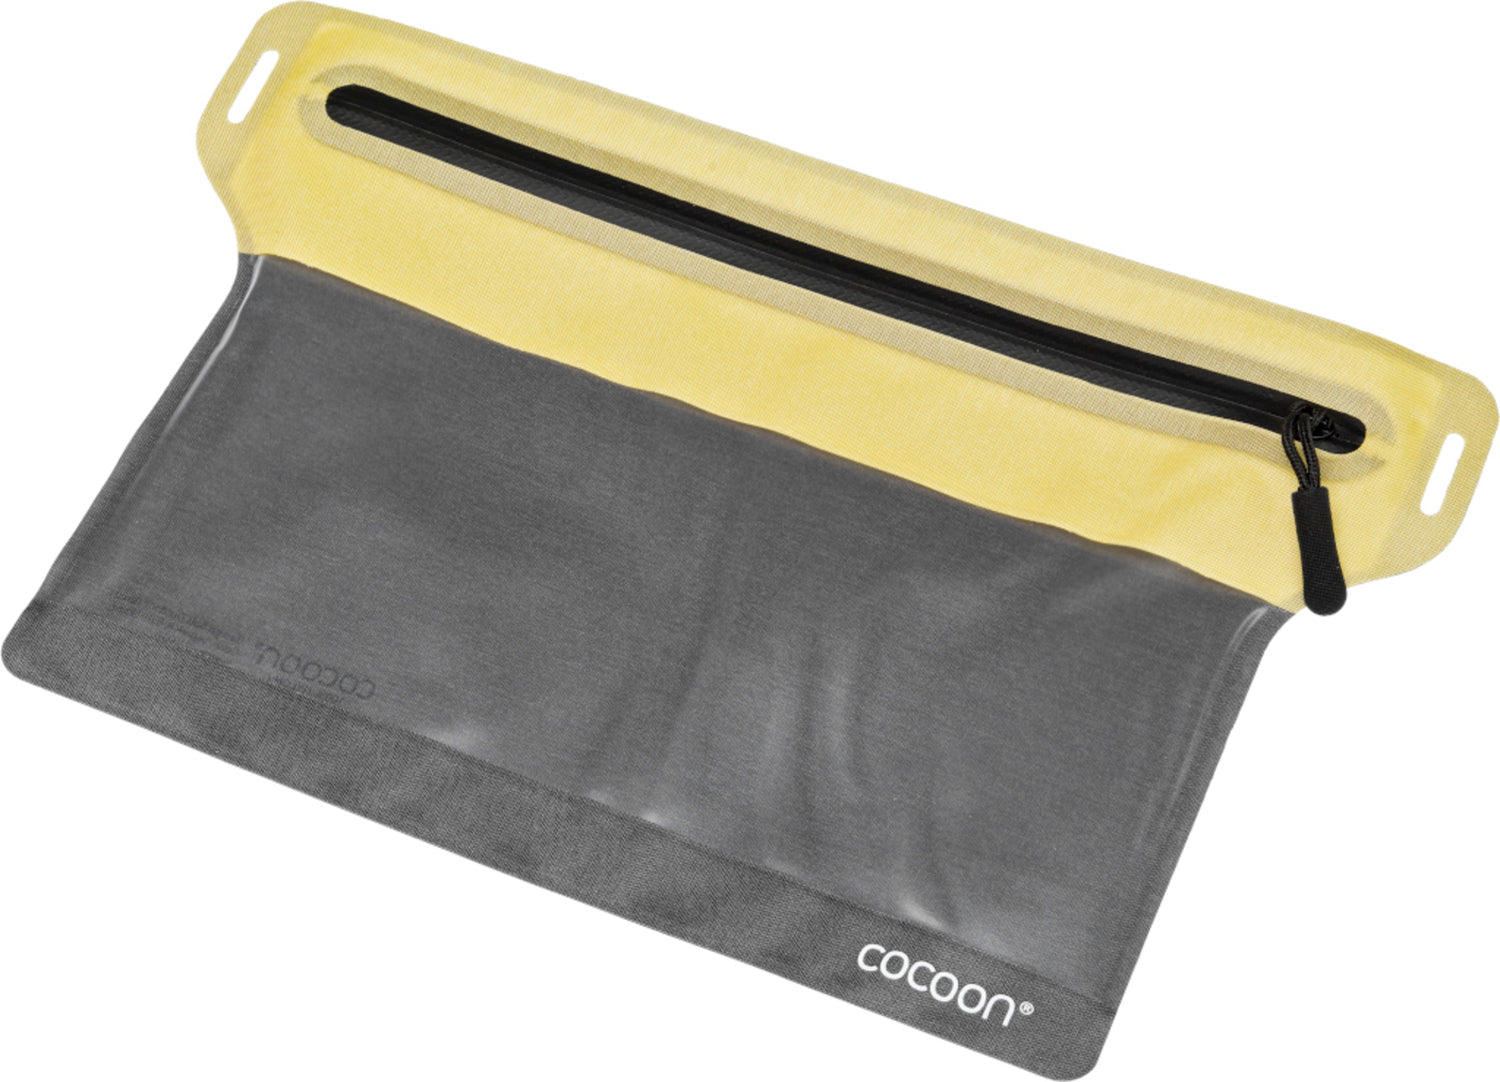 Cocoon Zippered Flat Document Bags Size S grey/yellow